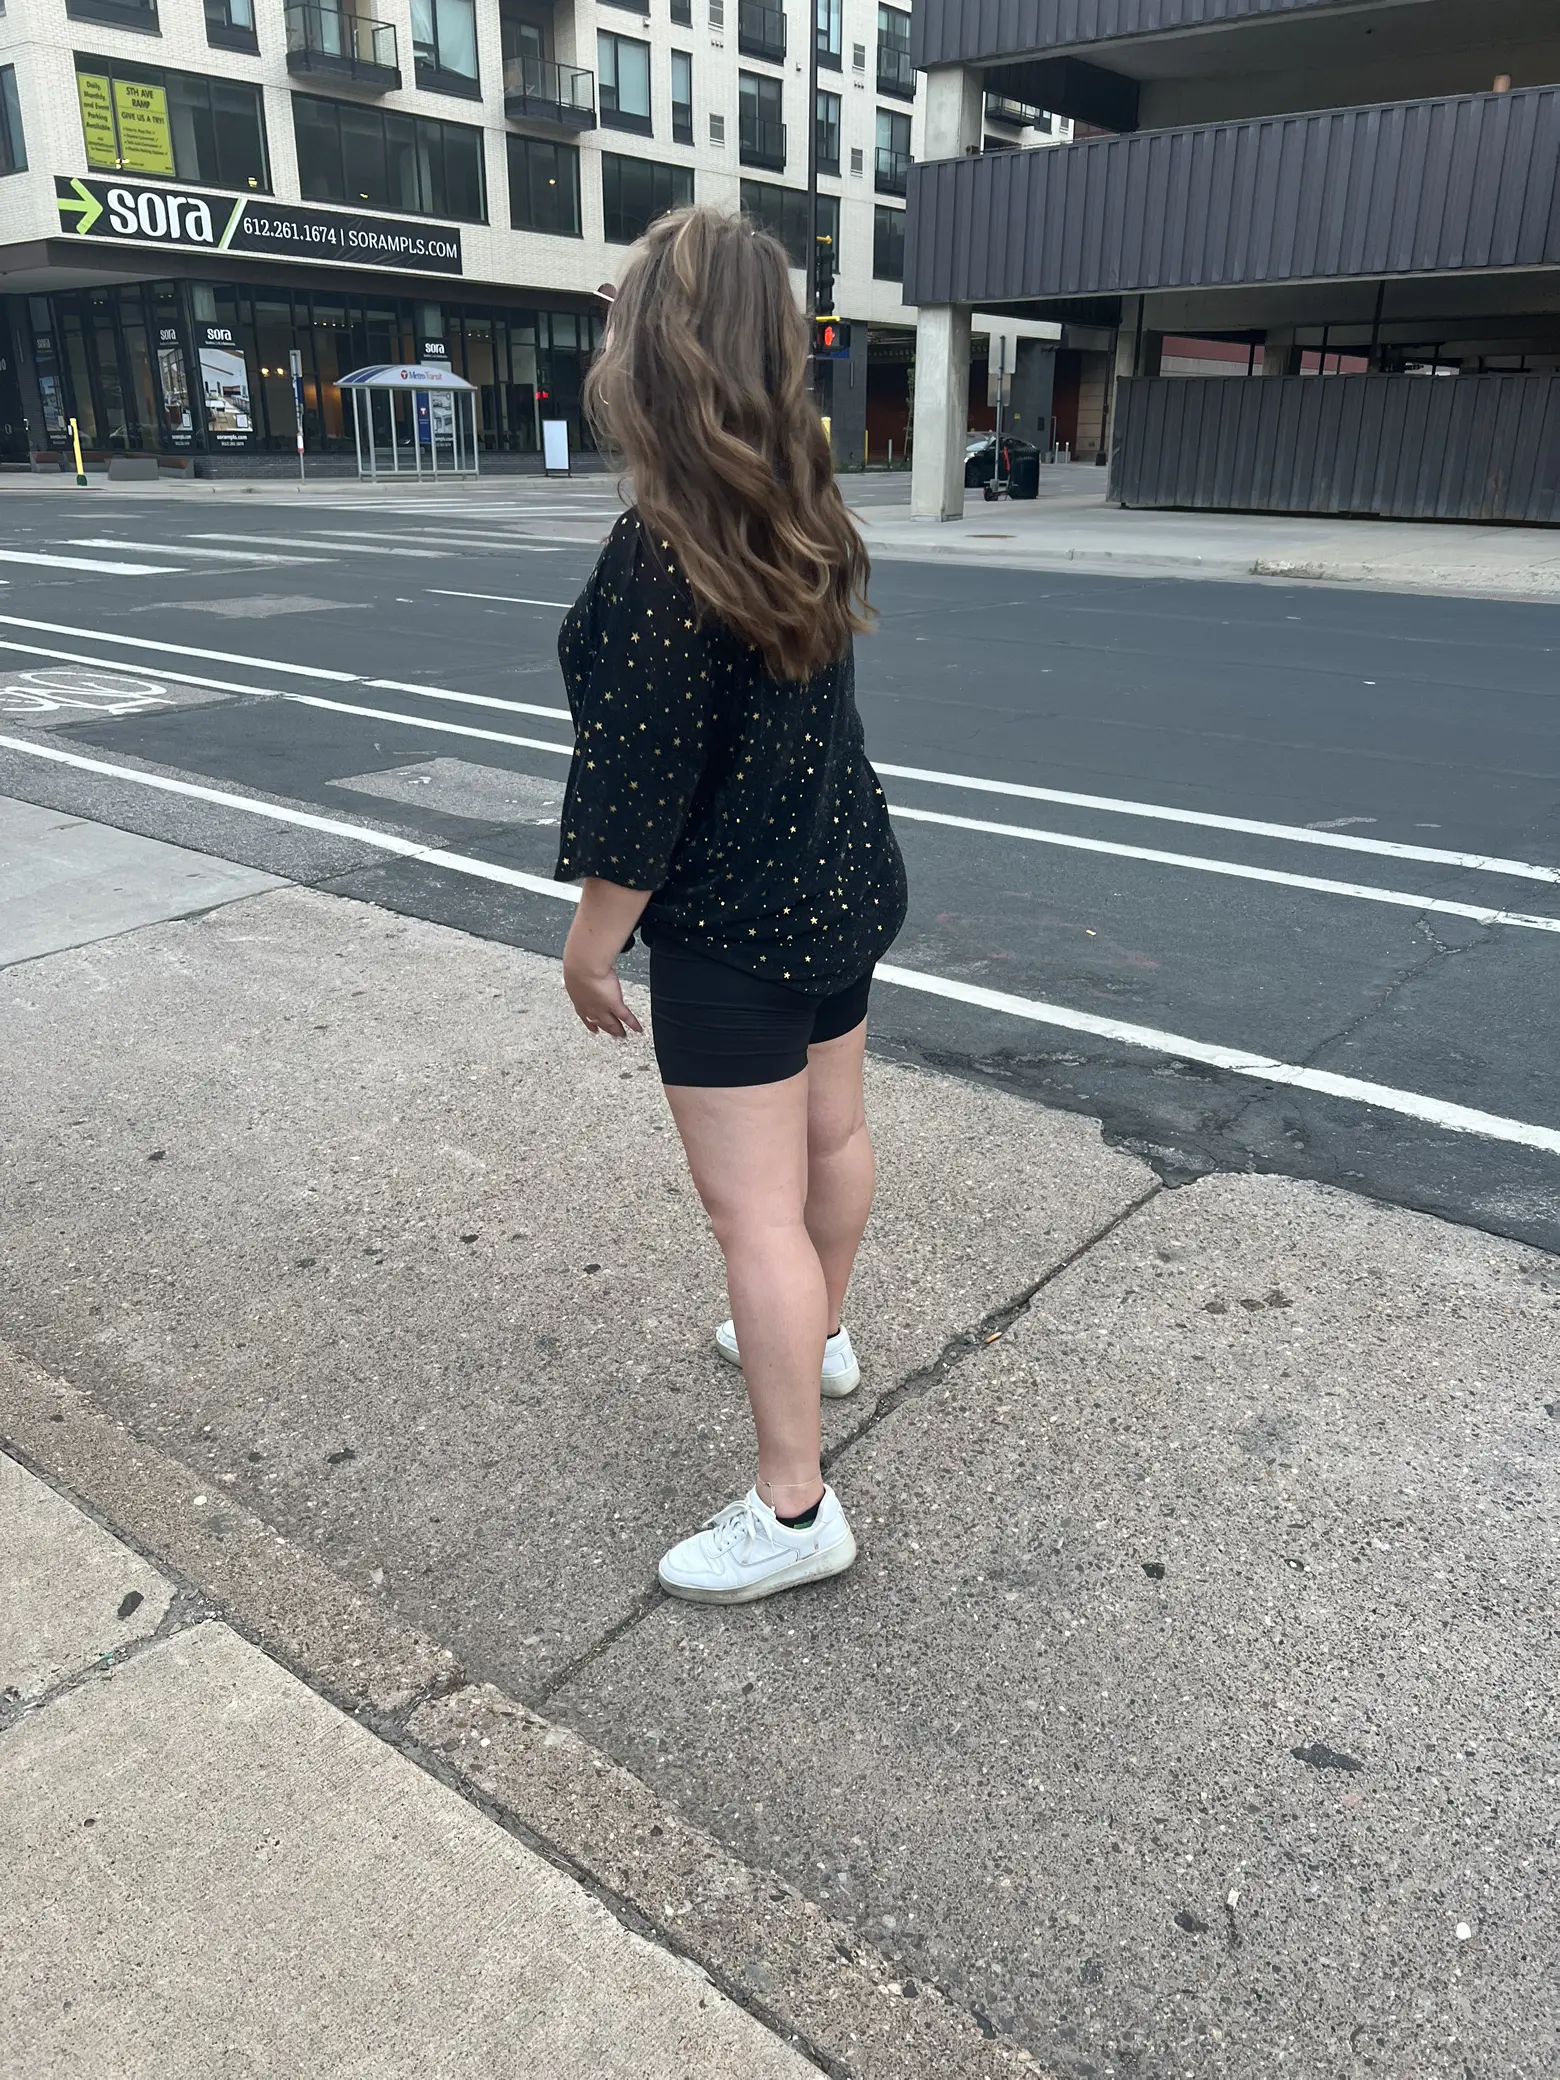  A woman wearing a black shirt and shorts is standing on a sidewalk.